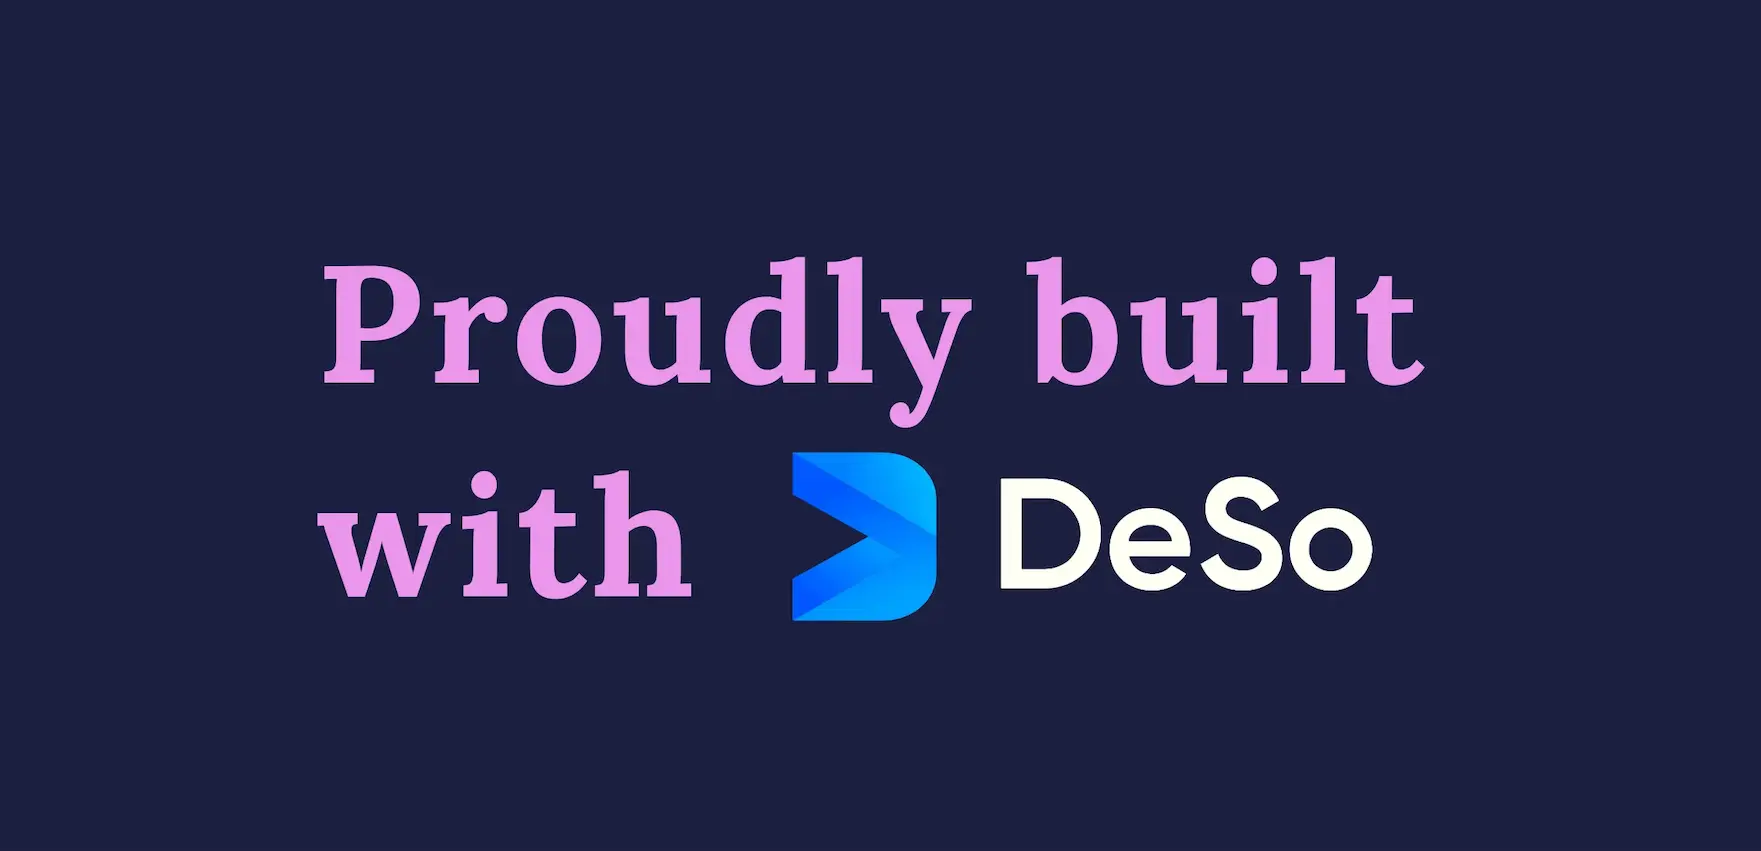 Proudly built with DeSo